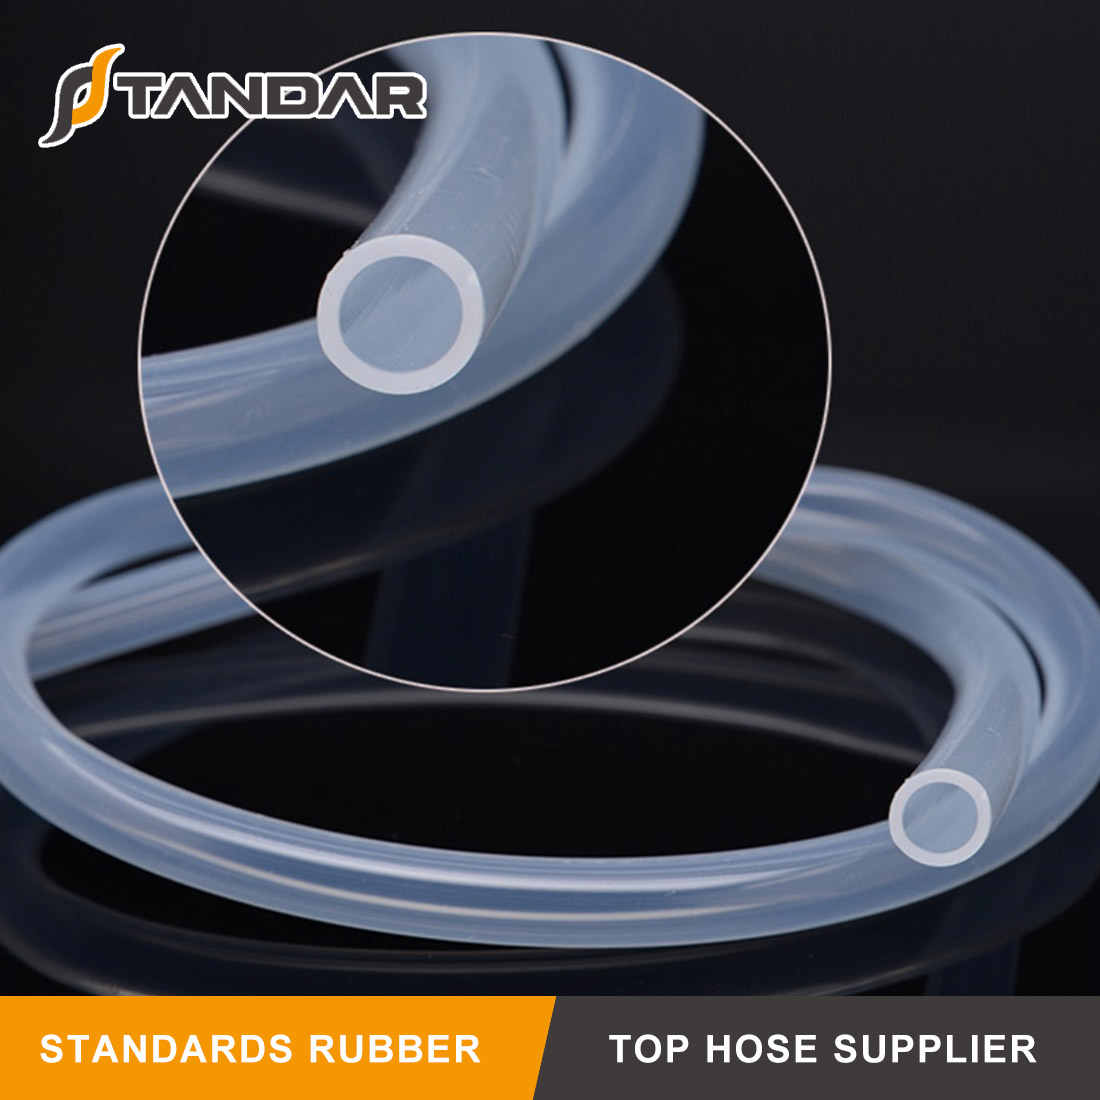 Silicone Milk Hose for The Dairy Industry